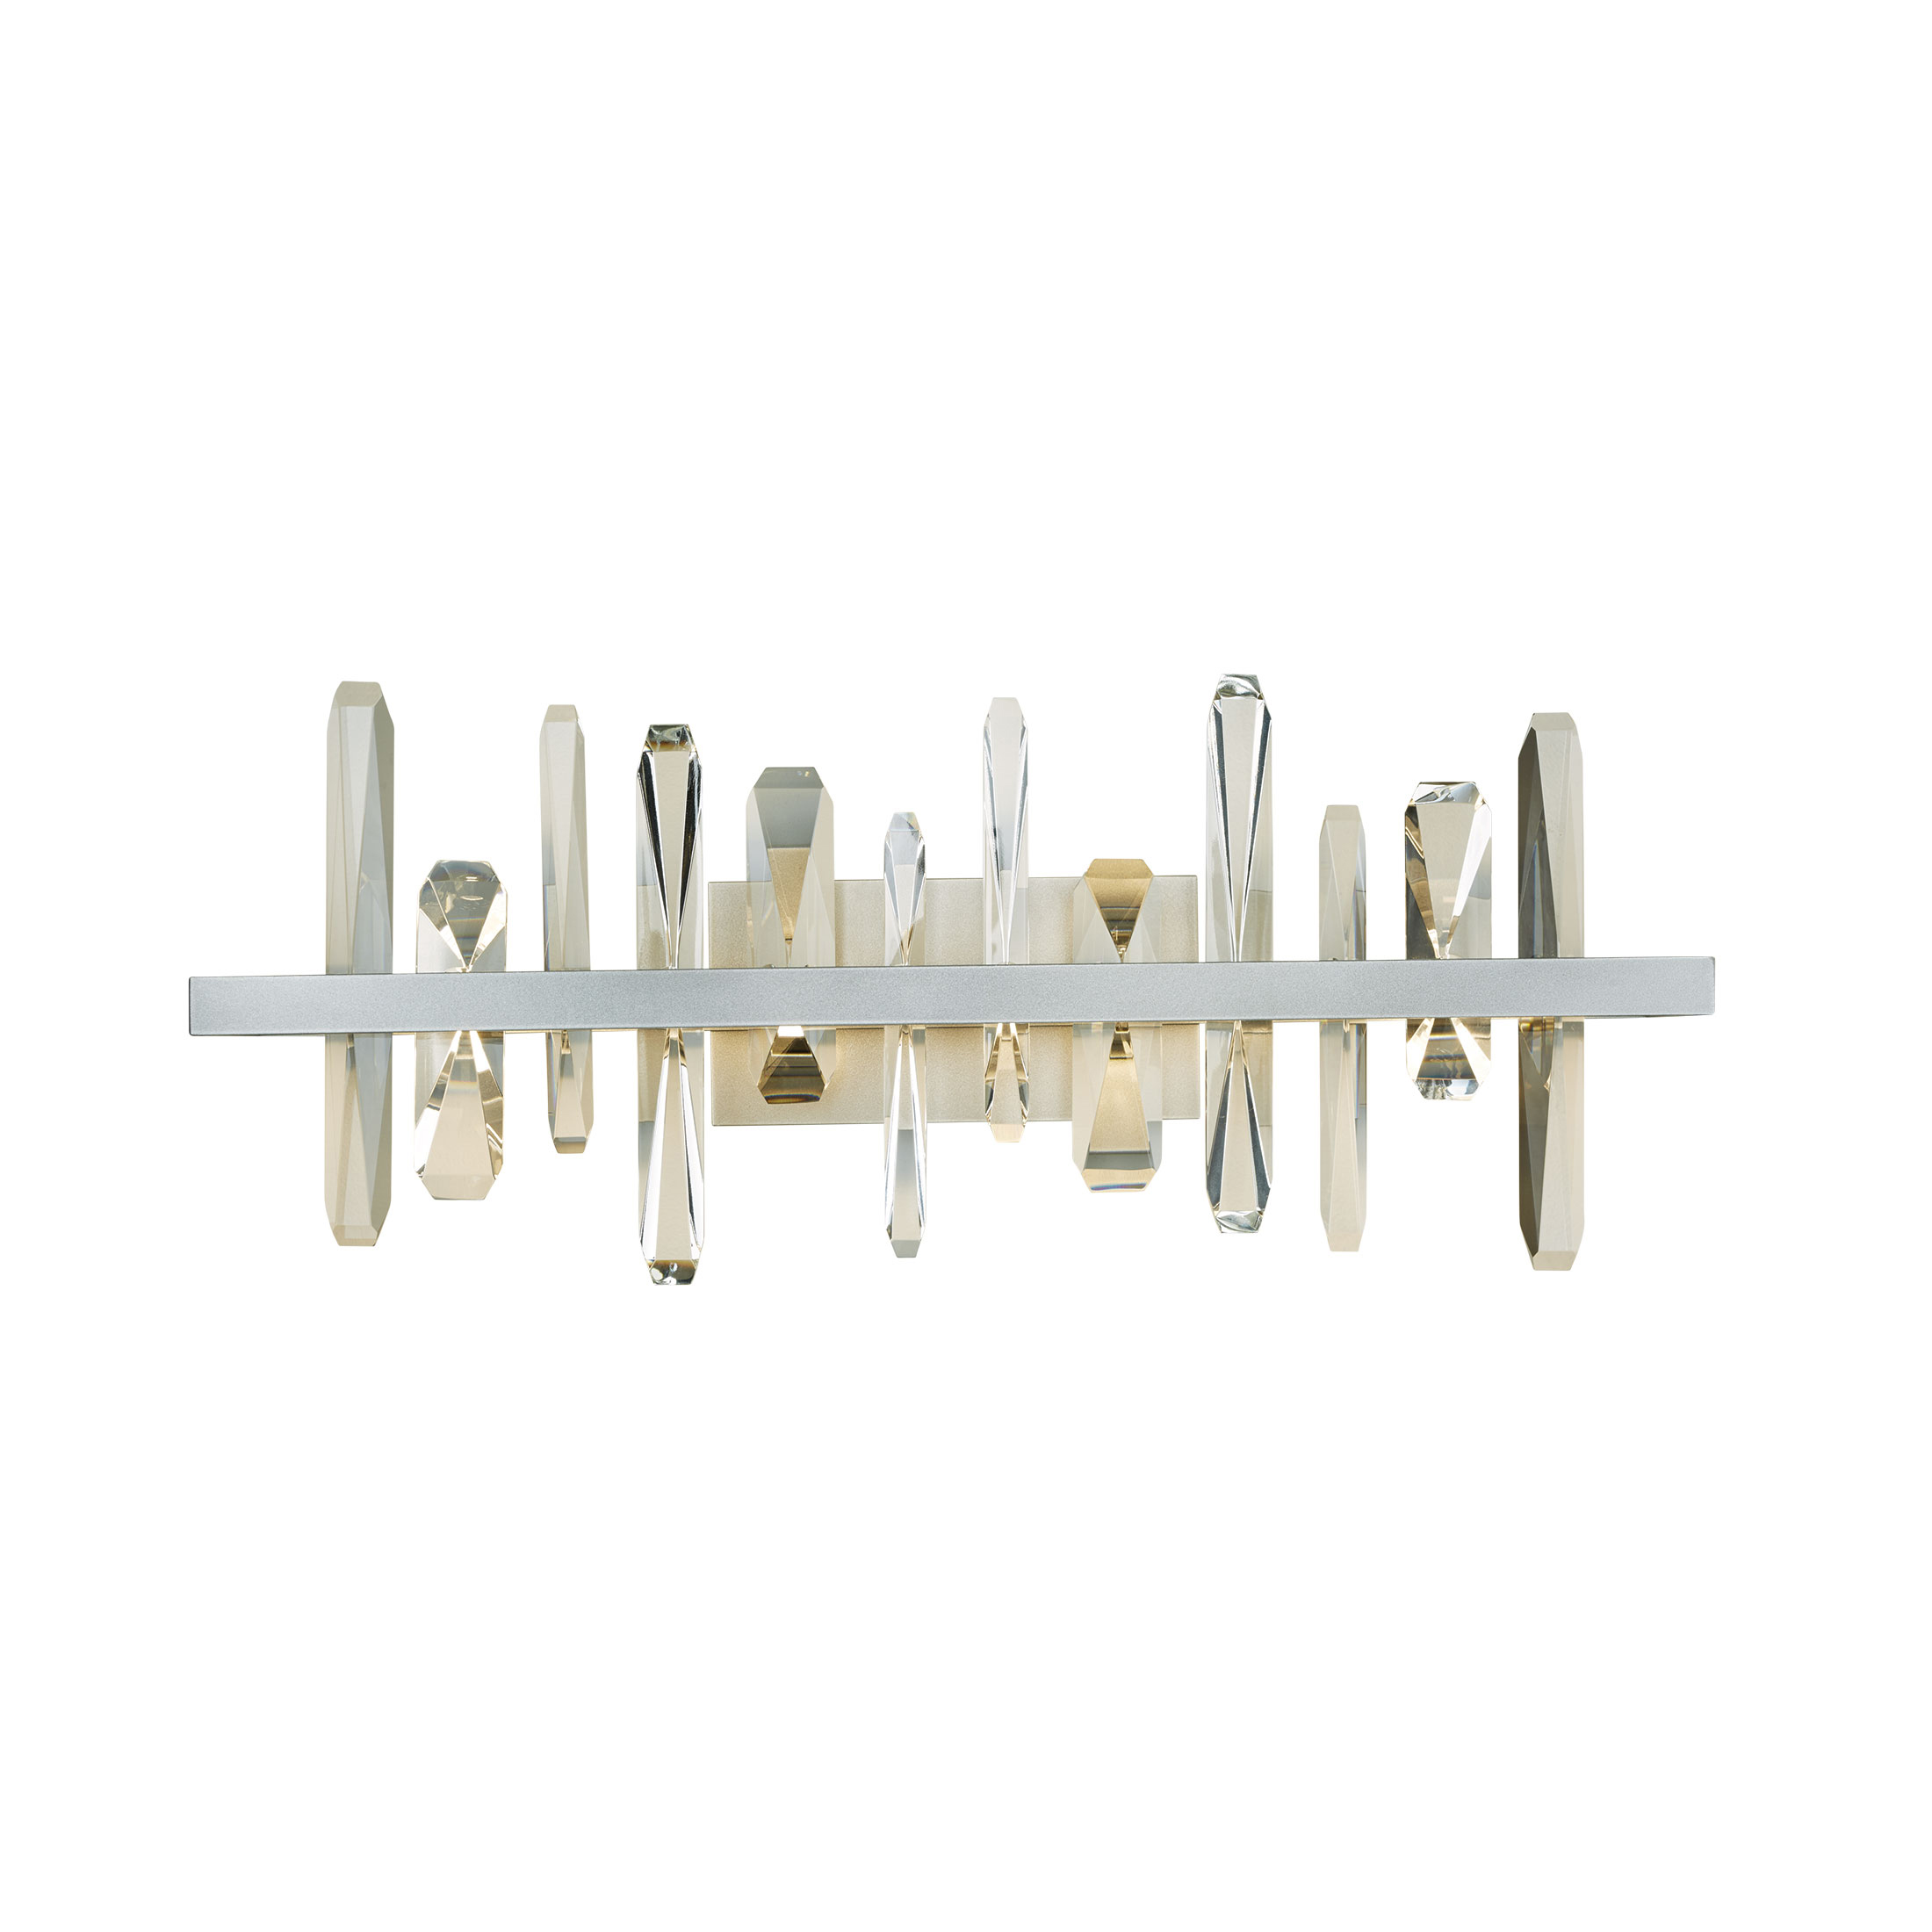 Solitude sconce with crystal towers from Synchronicity by Hubbardton Forge